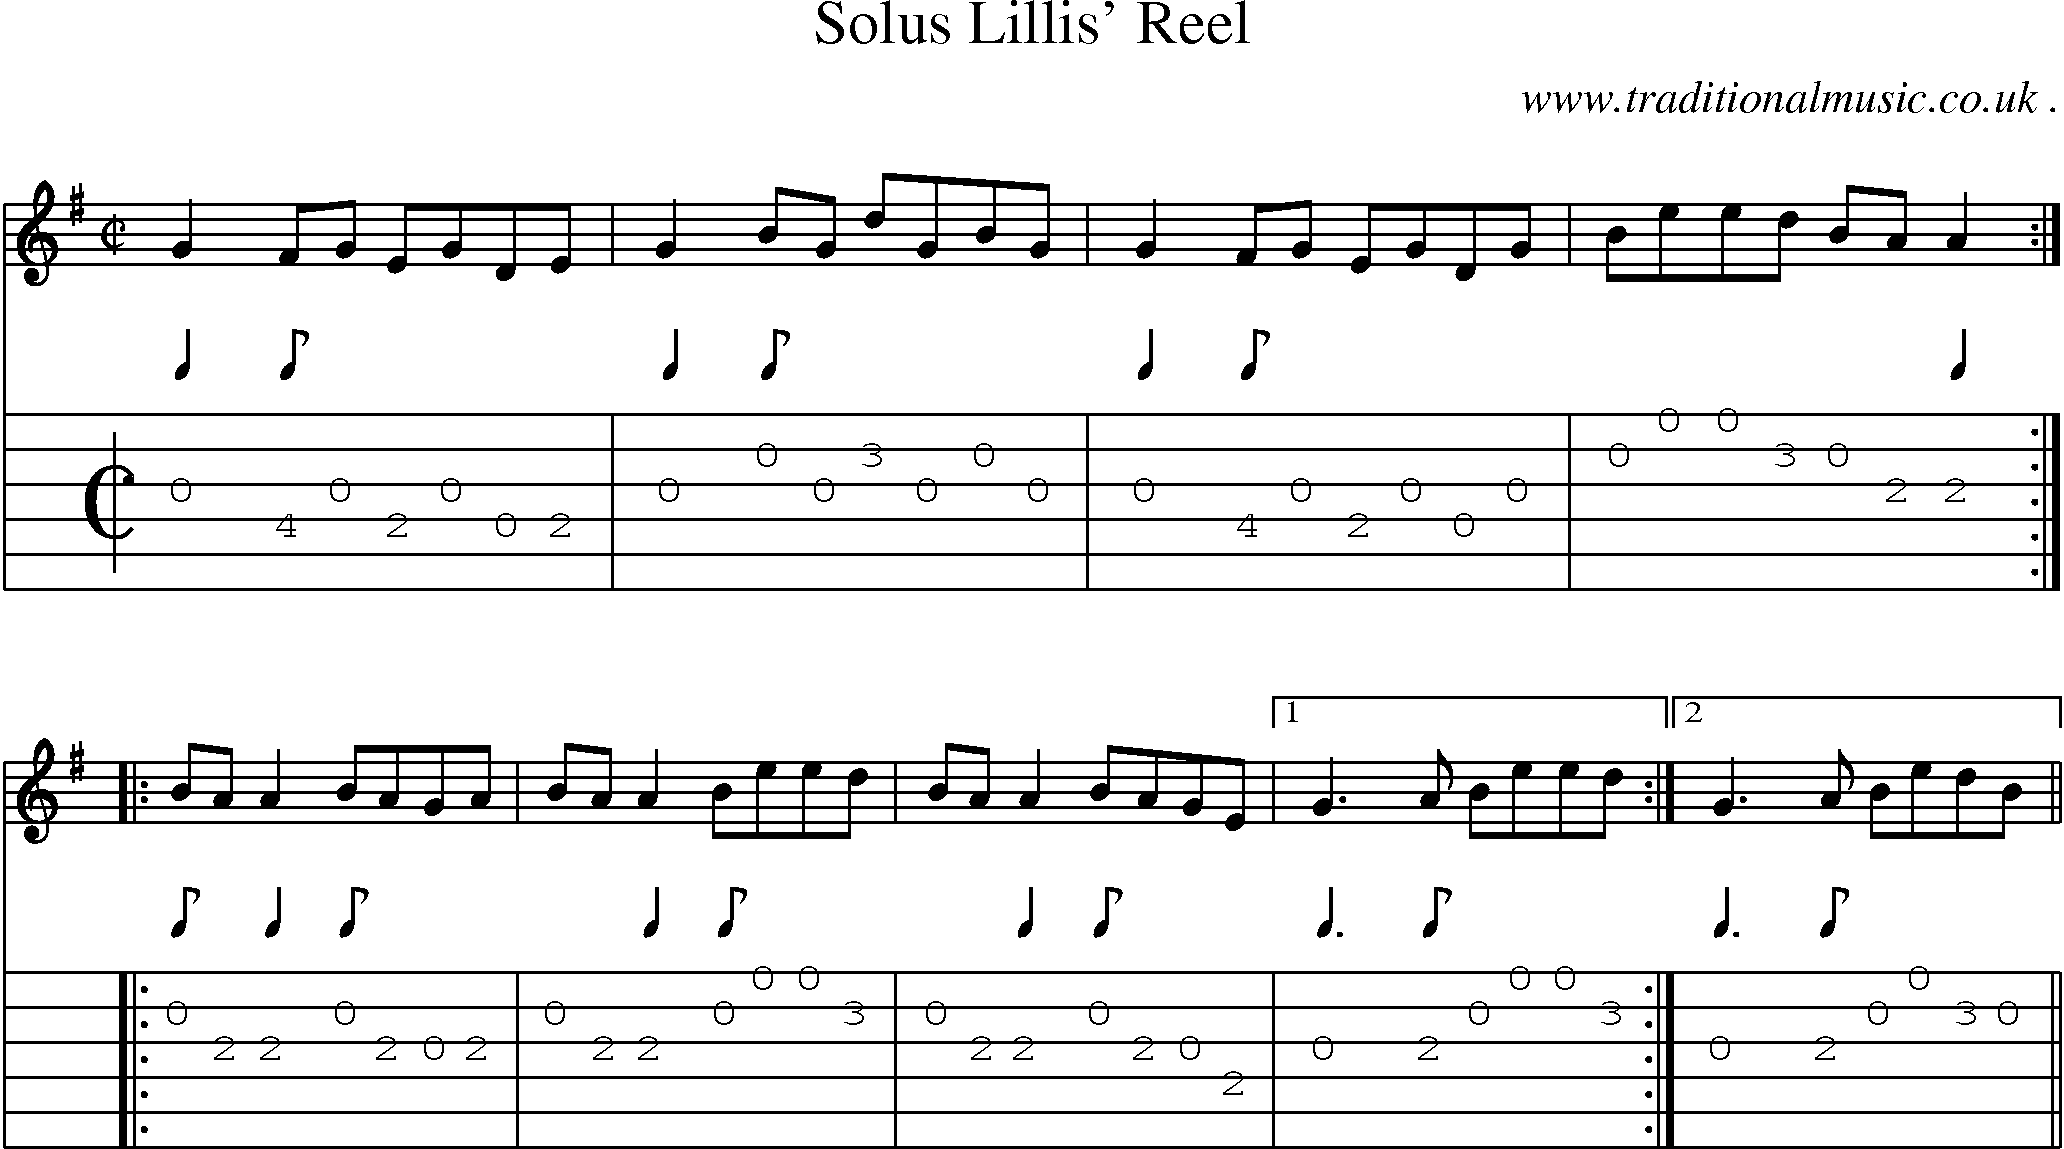 Sheet-Music and Guitar Tabs for Solus Lillis Reel